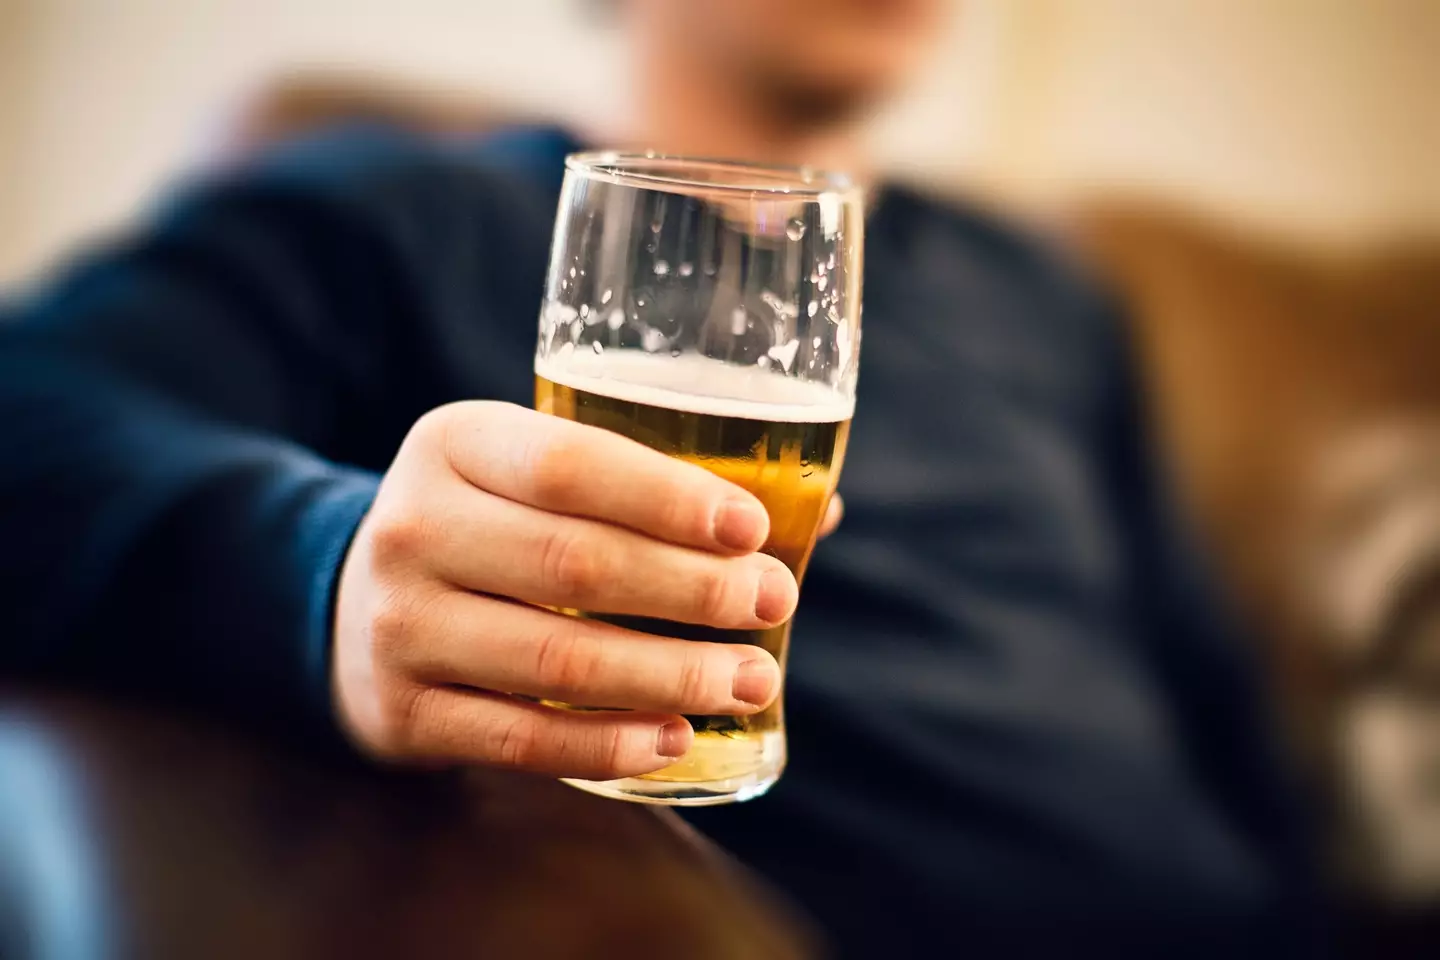 Doctor Richard Restak has revealed the exact age you should stop drinking at to prevent getting dementia.